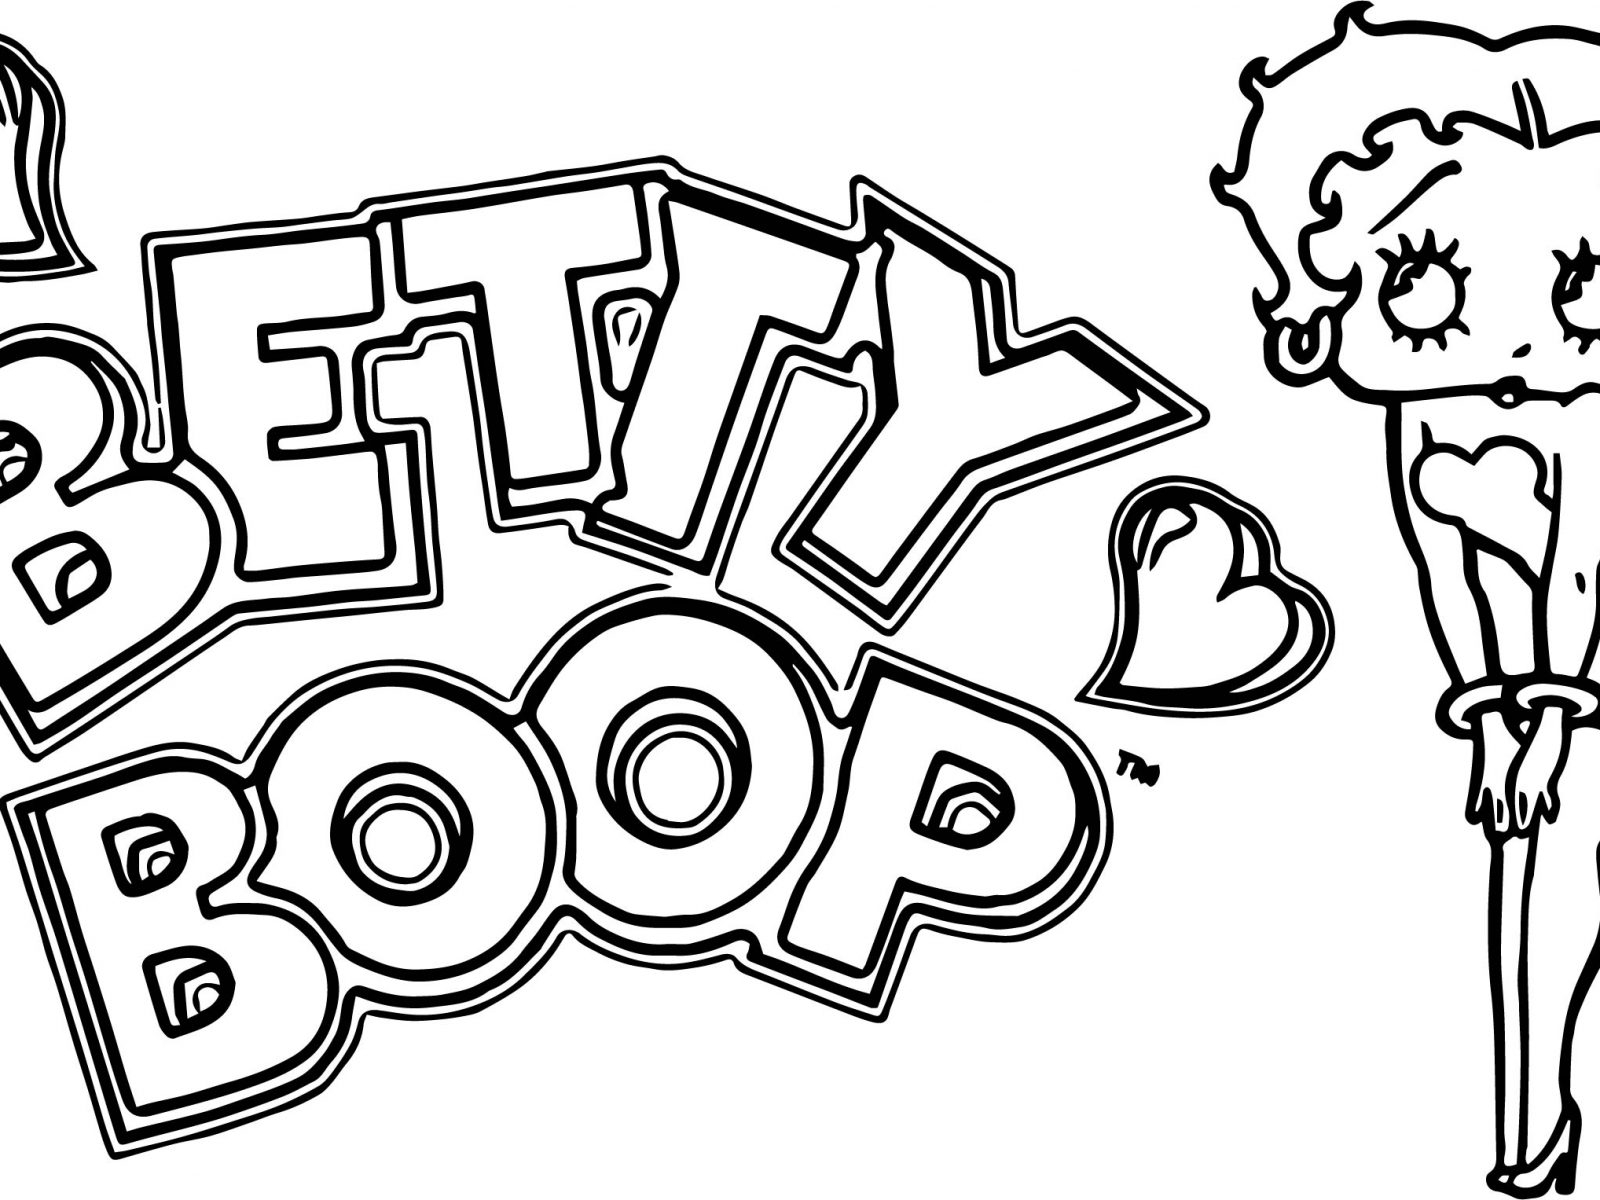 Bff Coloring Pages at GetColorings.com | Free printable ...